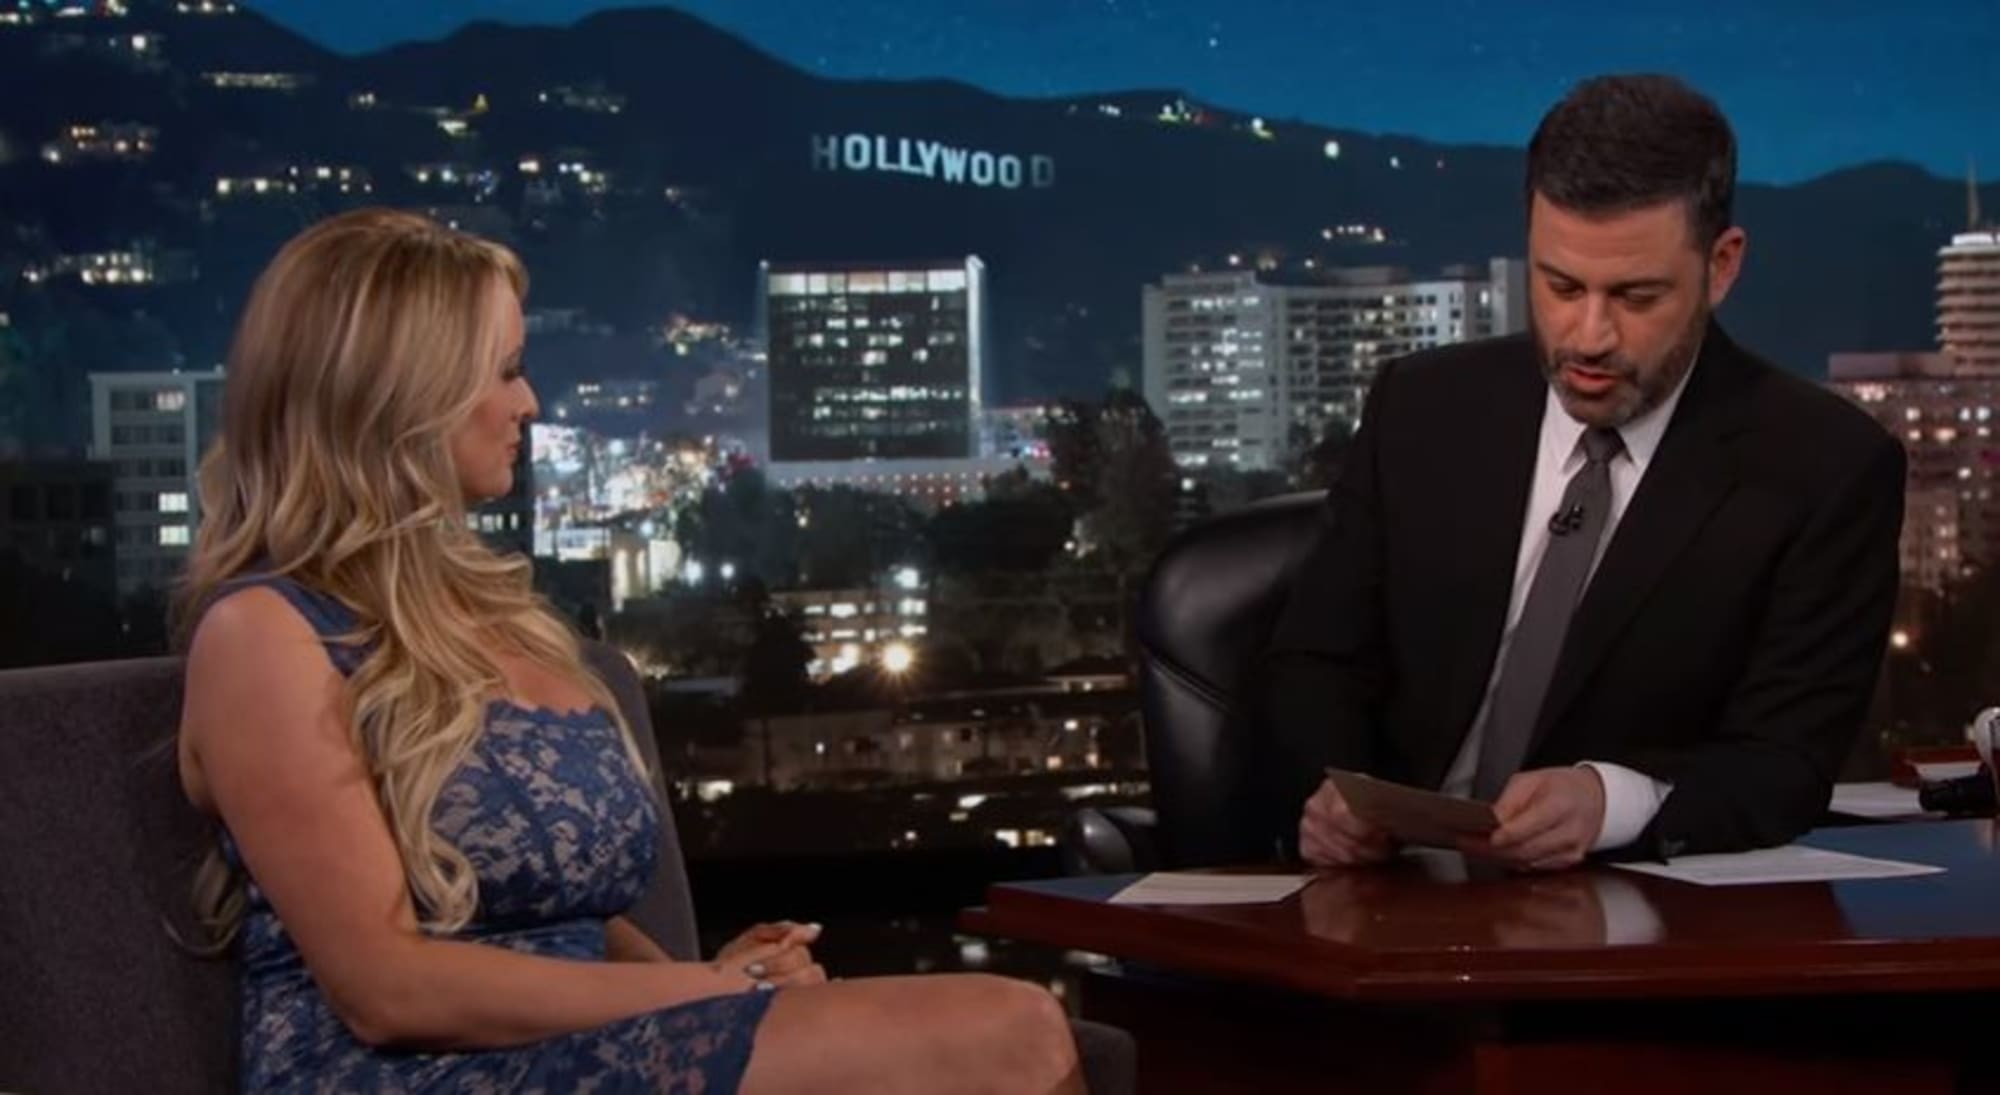 Watch Jimmy Kimmel's full interview with Stormy Daniels